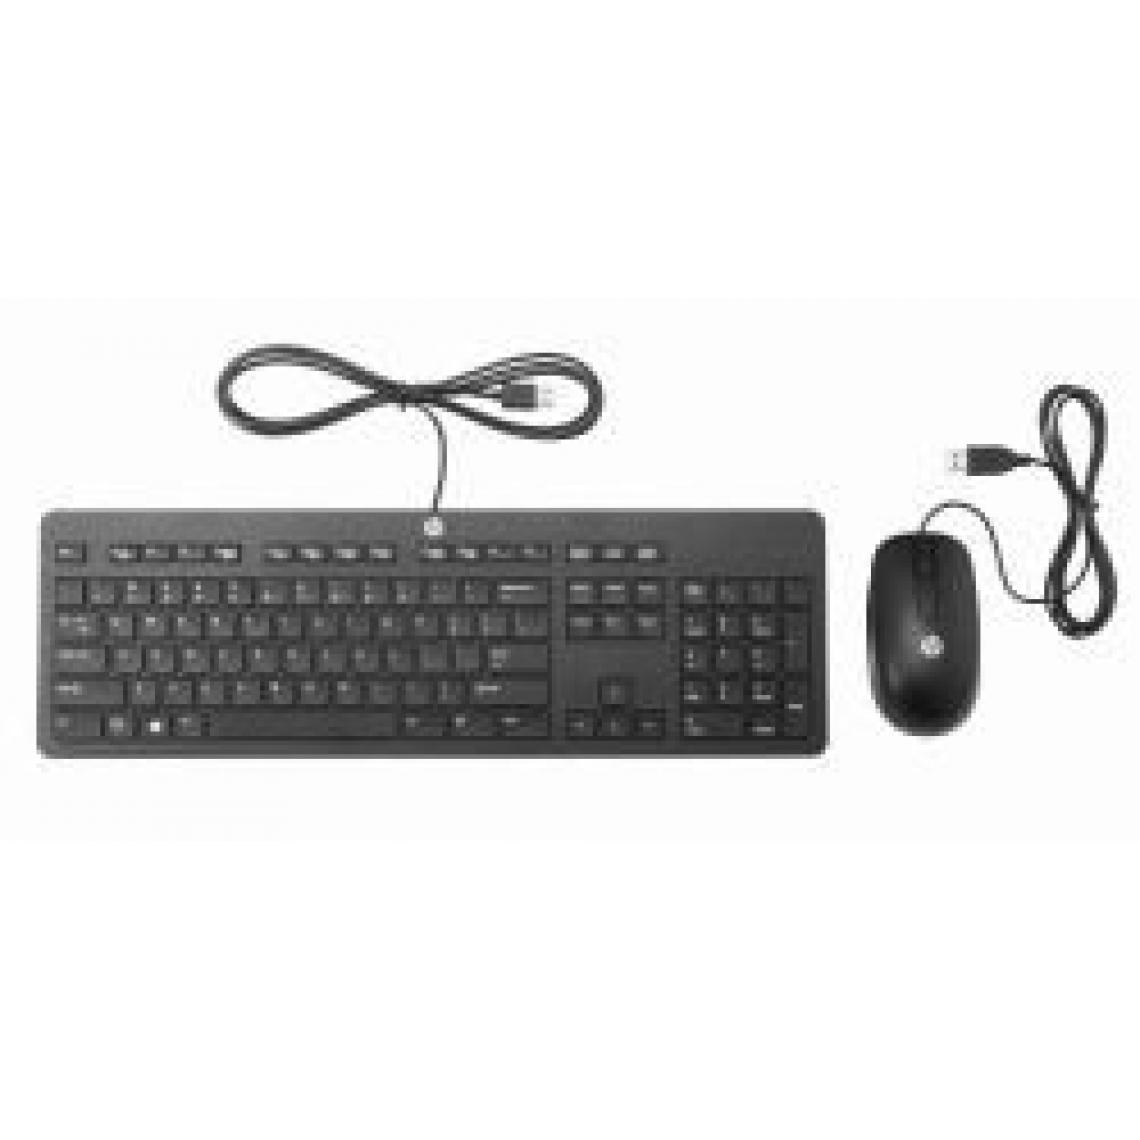 Hp - HP T6T83AA clavier USB Noir (HP SLIM USB KEYBOARD AND MOUSE) - Clavier